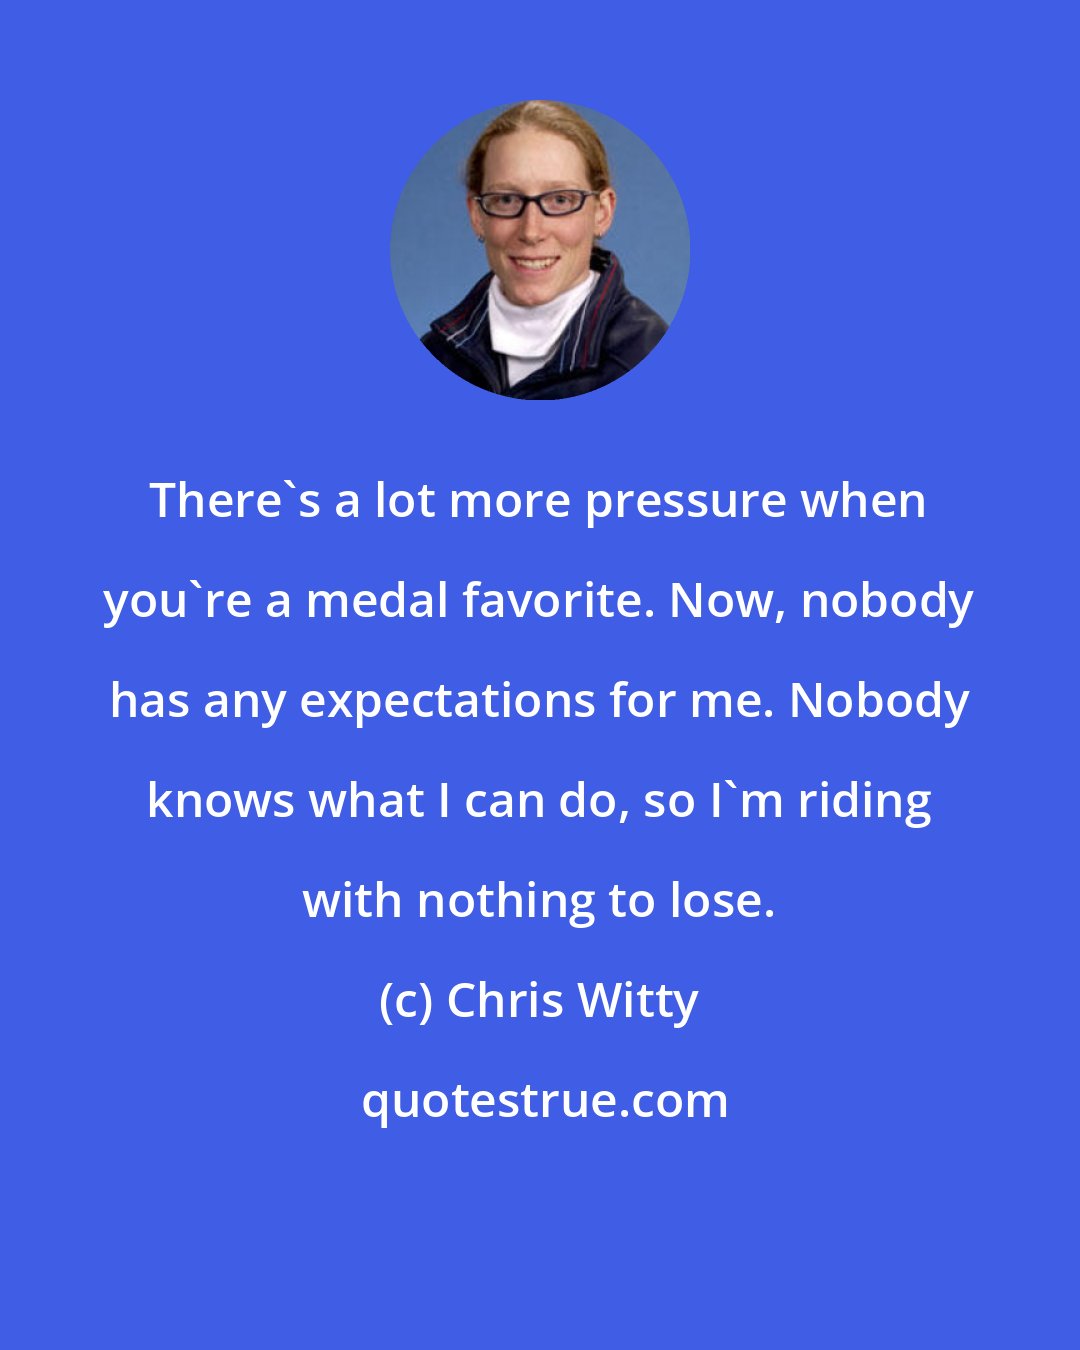 Chris Witty: There's a lot more pressure when you're a medal favorite. Now, nobody has any expectations for me. Nobody knows what I can do, so I'm riding with nothing to lose.